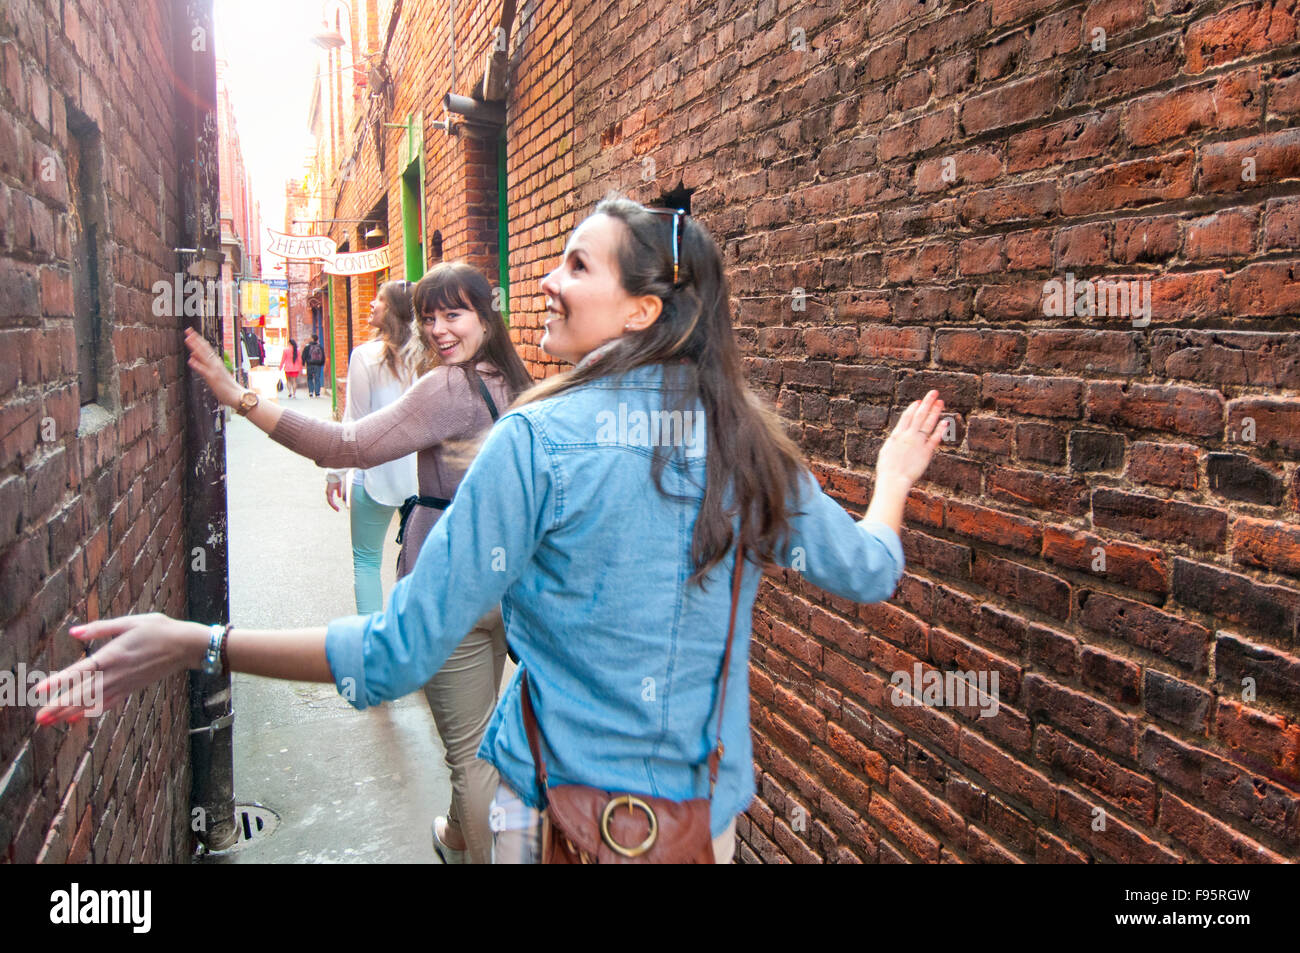 Young women are amazed at the narrow corridor of Fan Tan Alley, an area in Chinatown that features interesting shops in Stock Photo